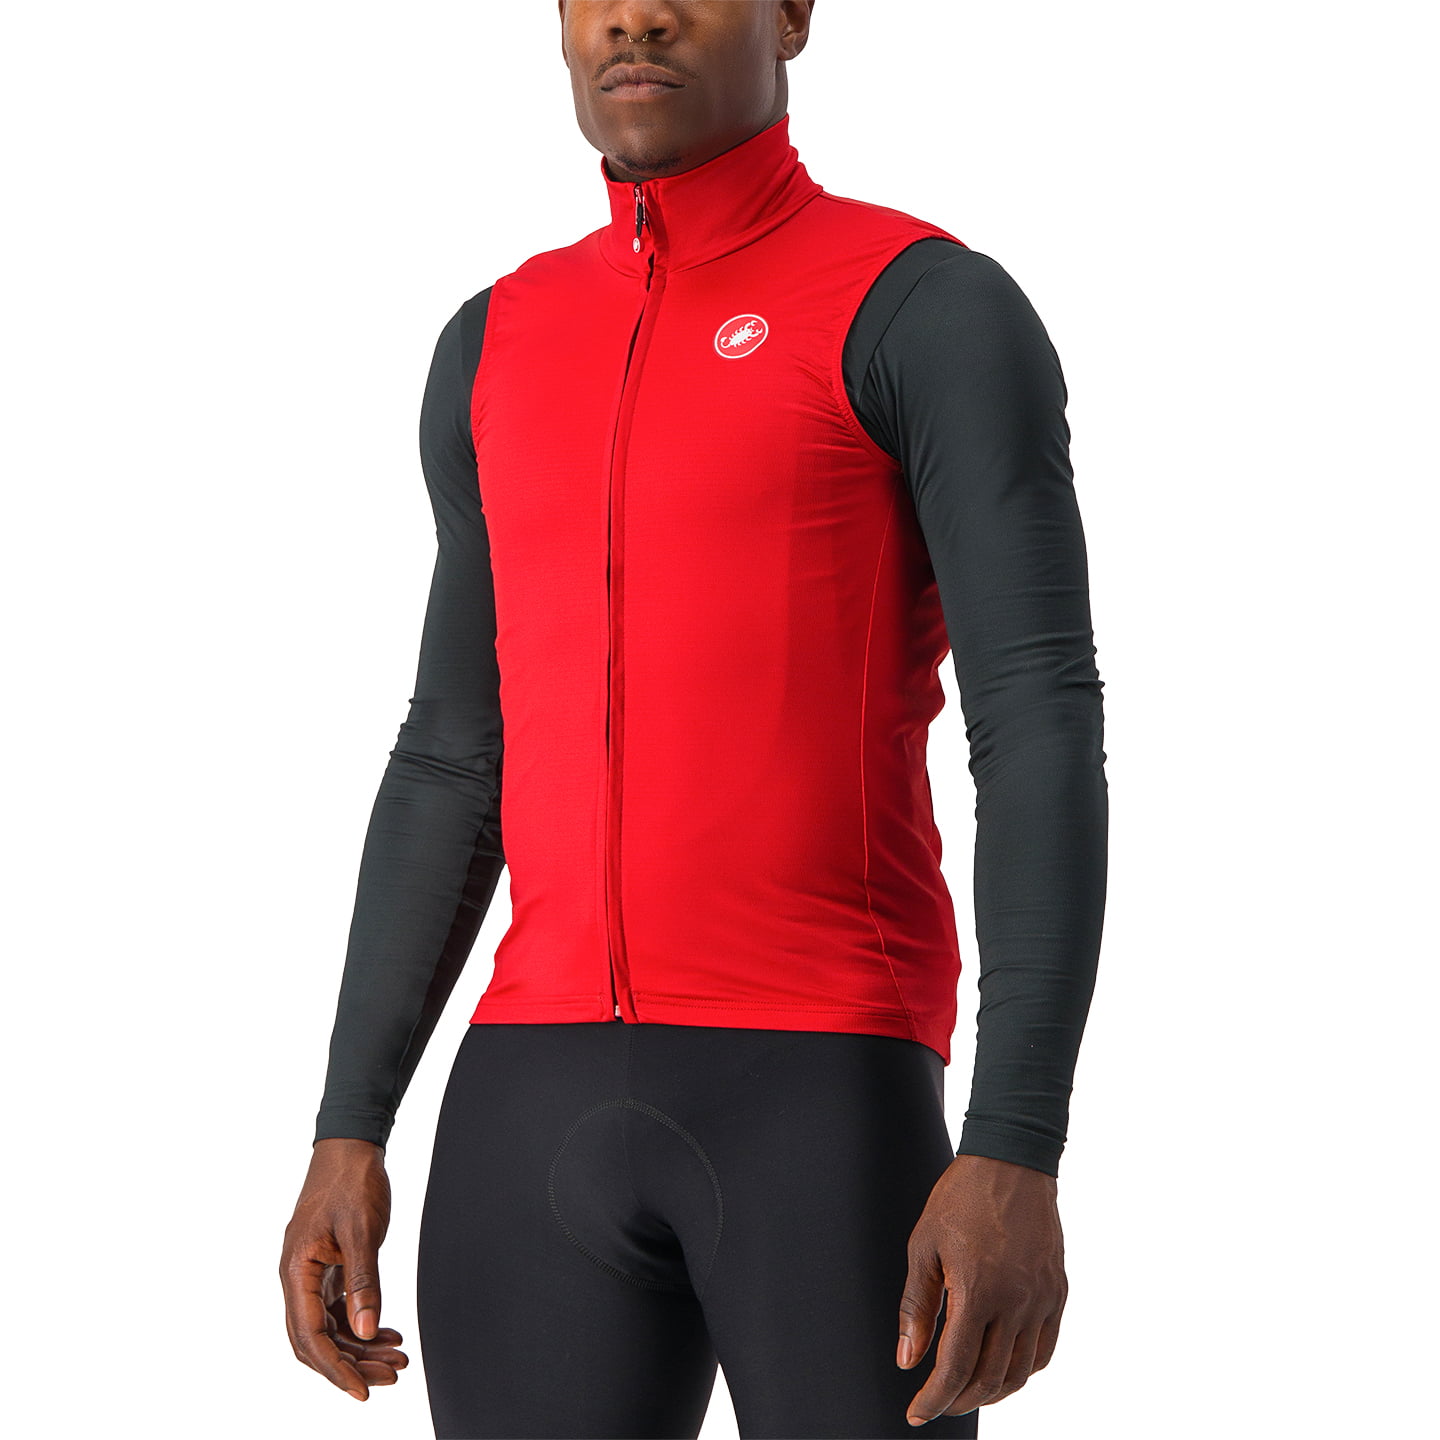 Thermal Pro Mid Thermal Vest Thermal Vest, for men, size 2XL, Cycling vest, Cycling clothing